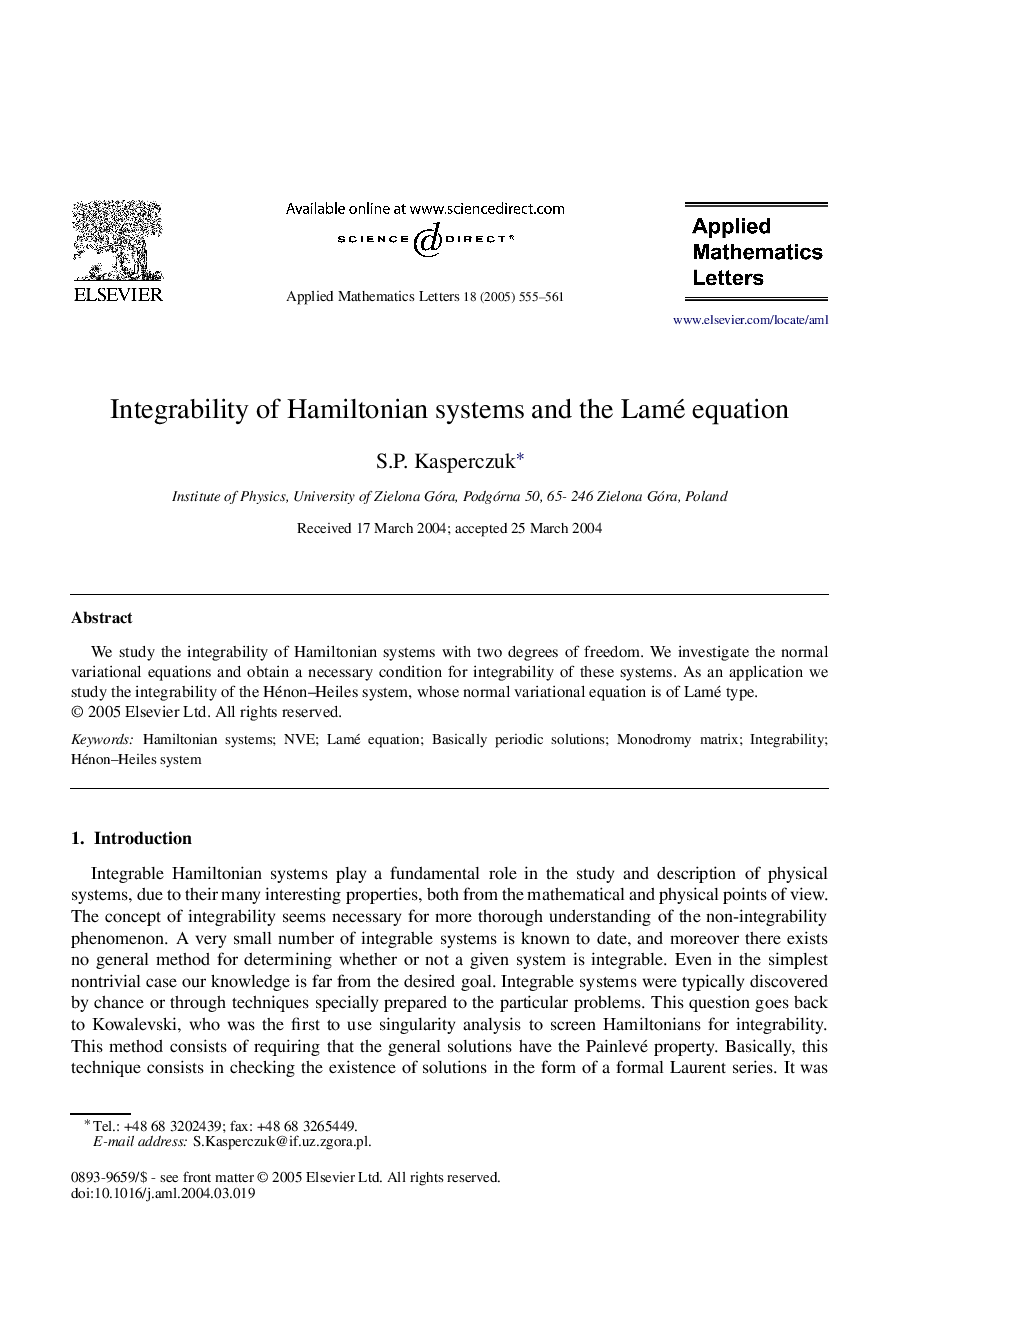 Integrability of Hamiltonian systems and the Lamé equation